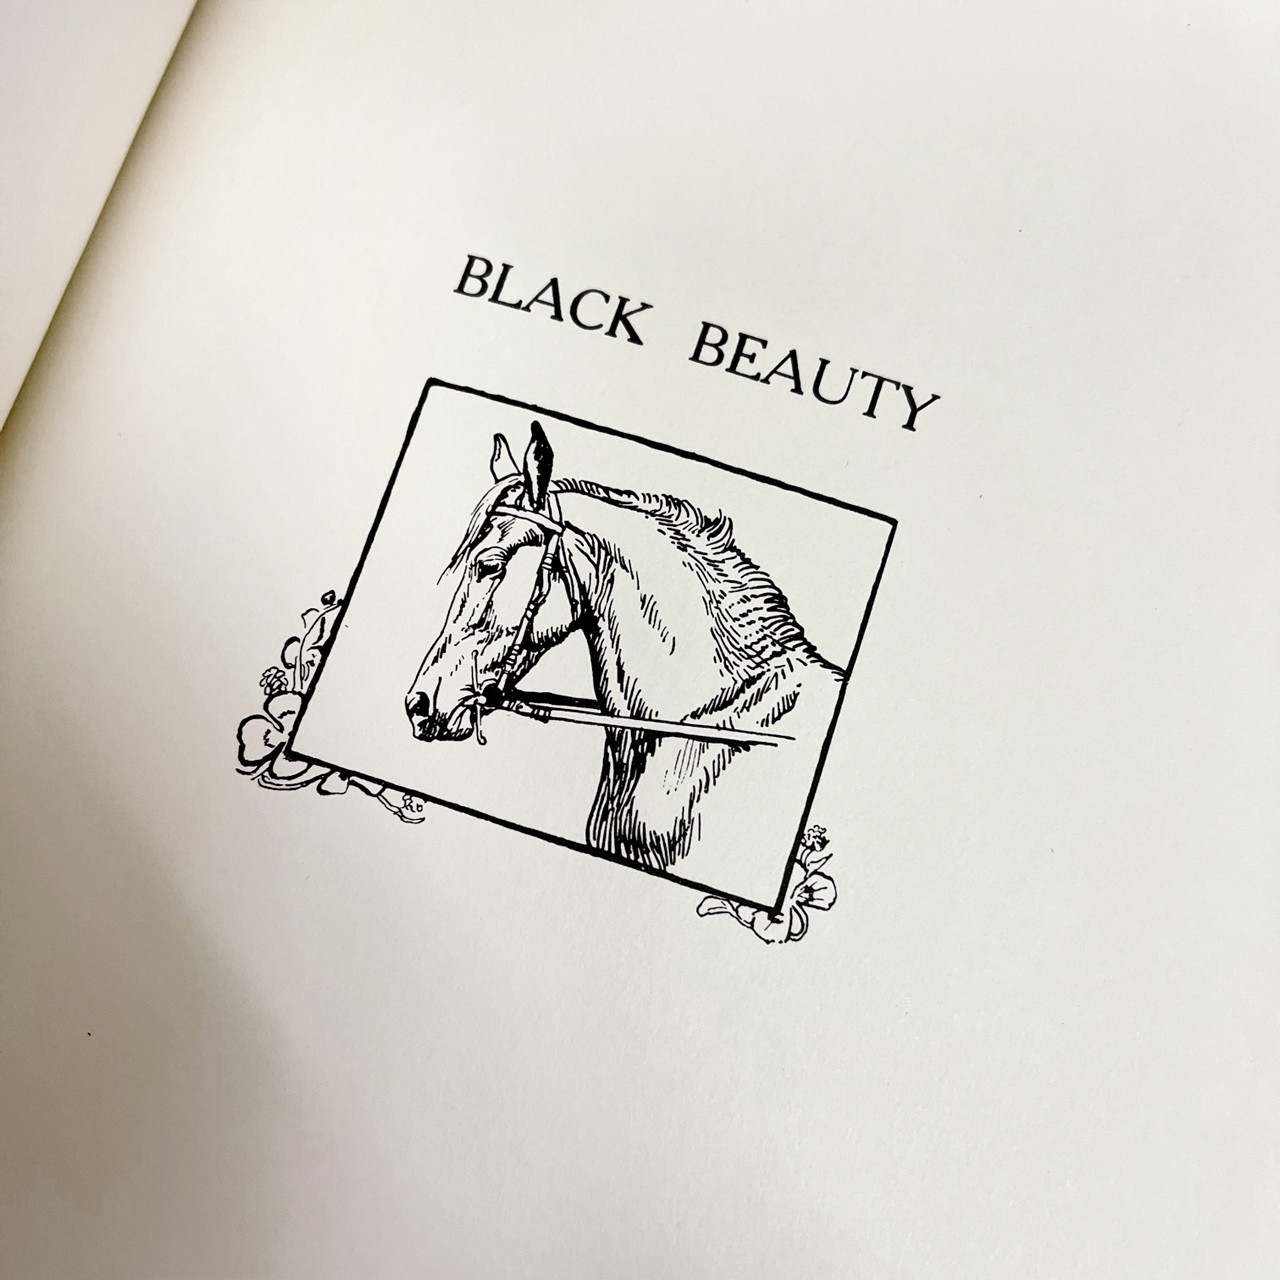 Anna Sewell "Black Beauty" Leather Bound Collector's Edition, Limited Edition